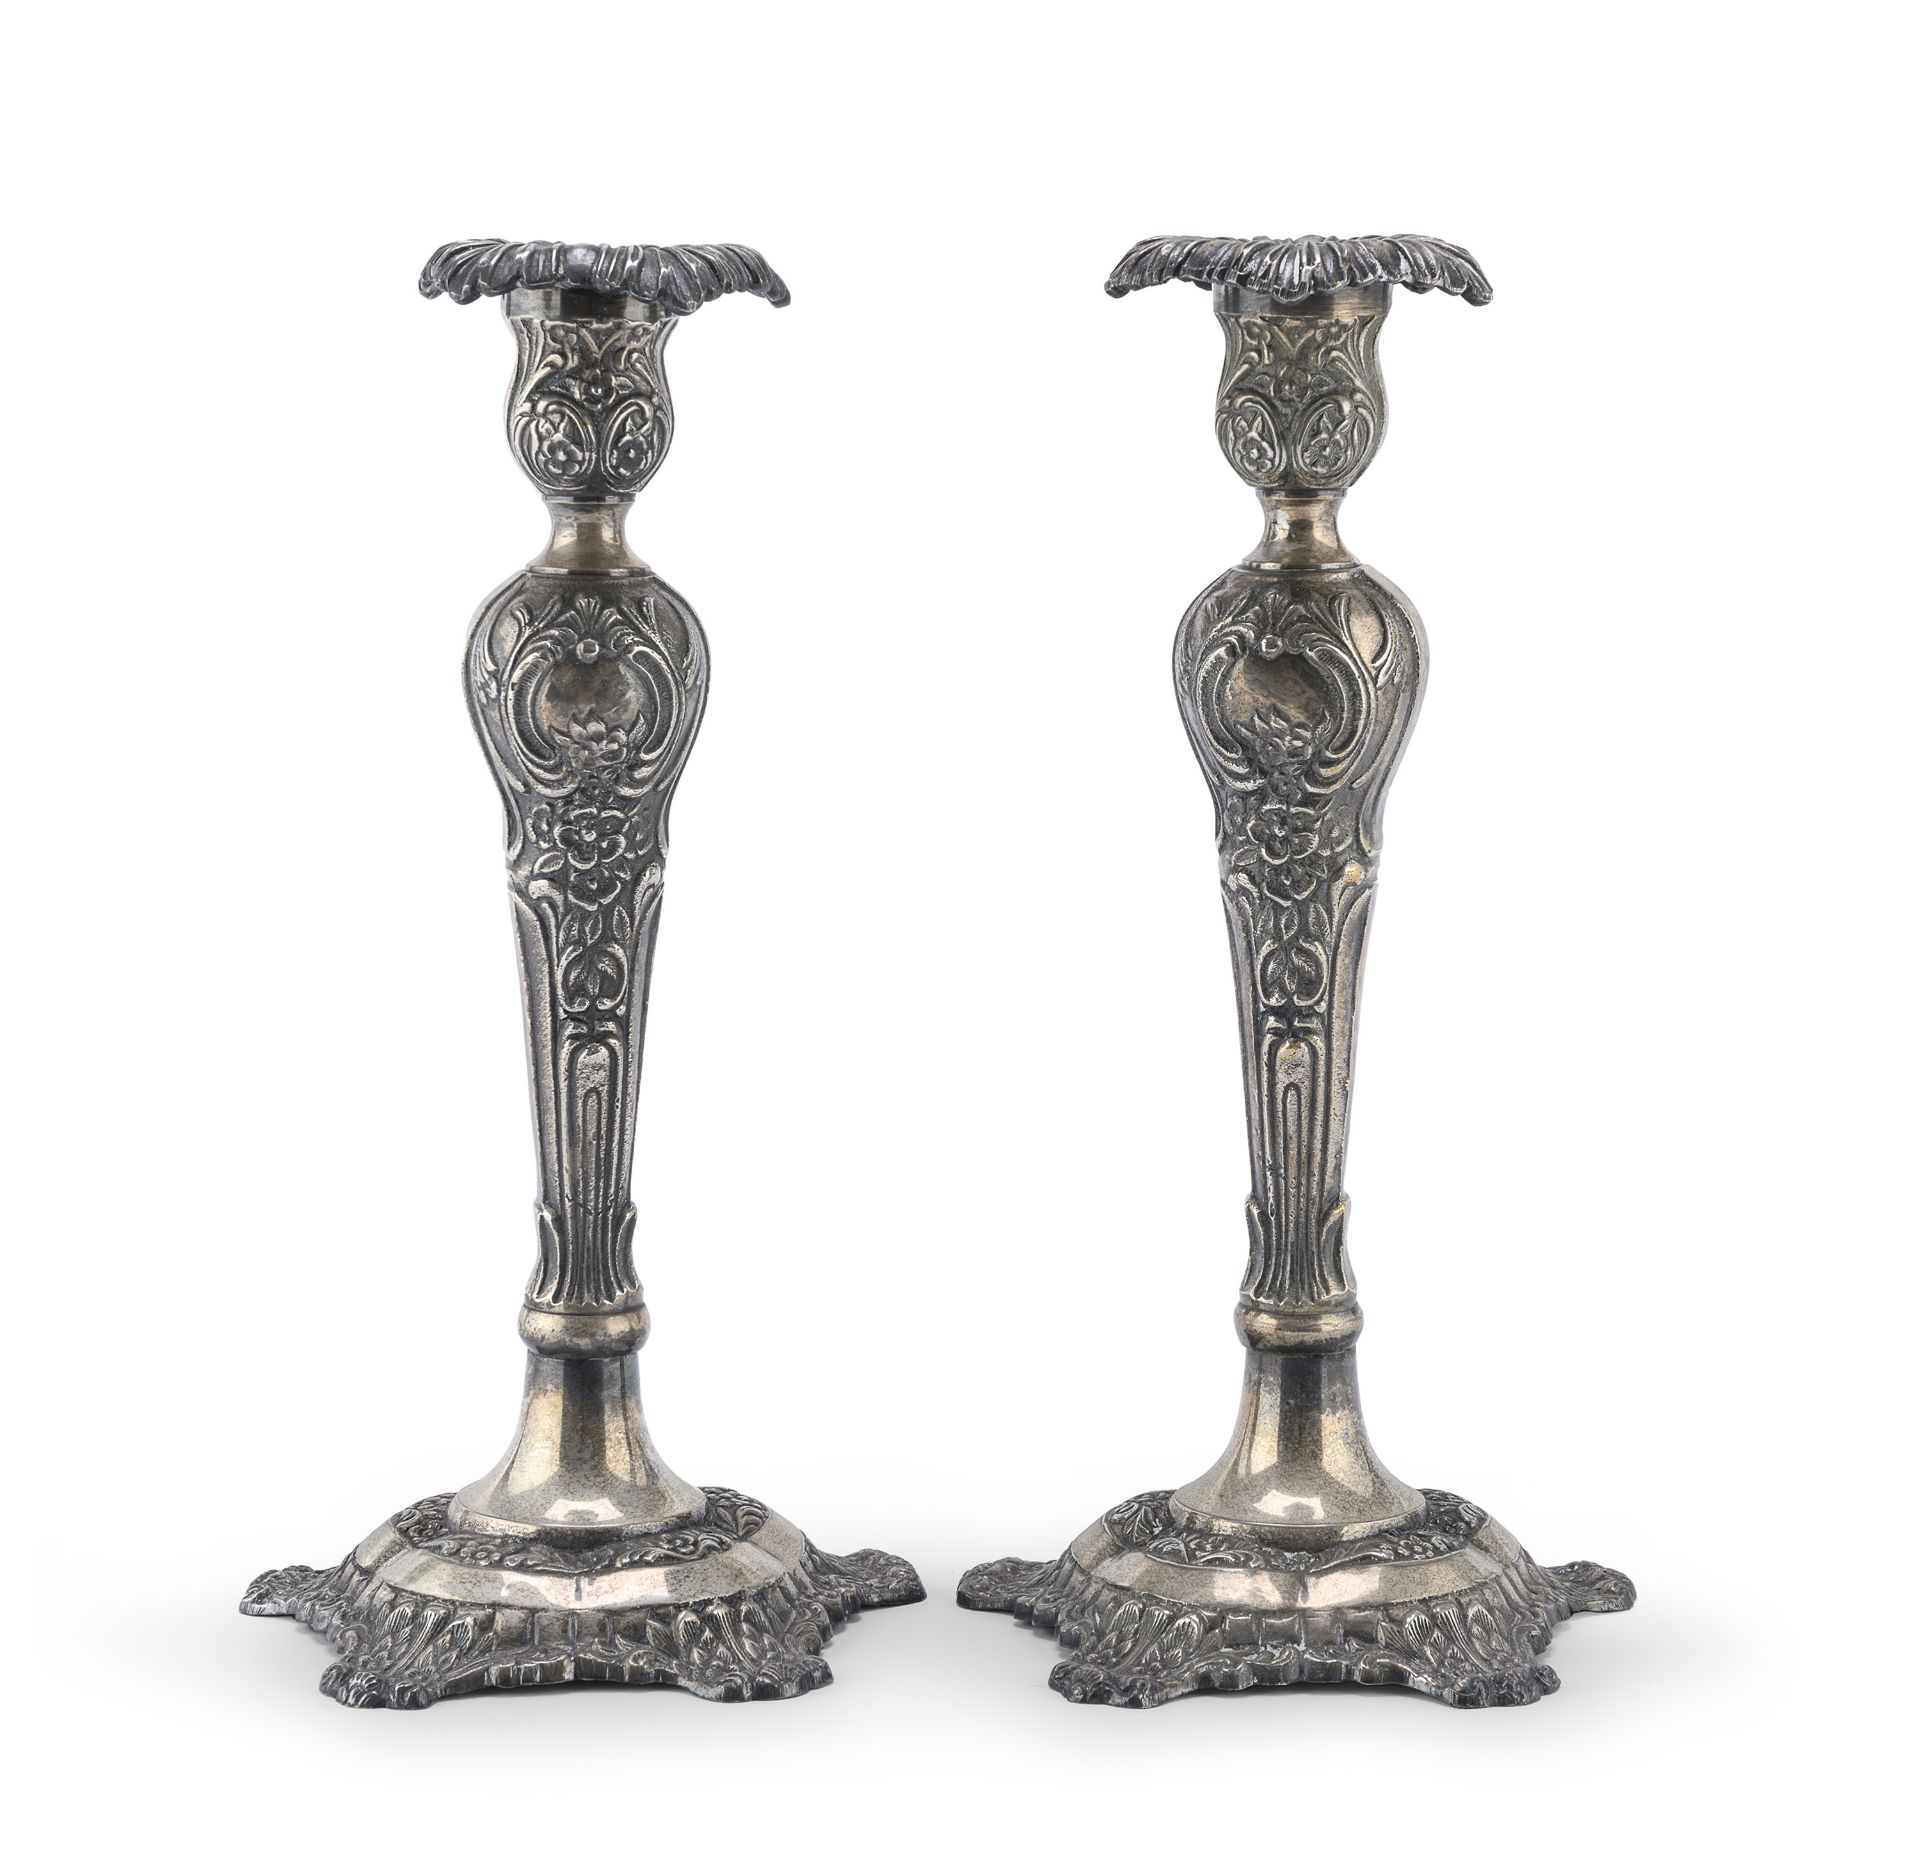 PAIR OF SILVER-PLATED BRONZE CANDLESTICKS EARLY 20TH CENTURY